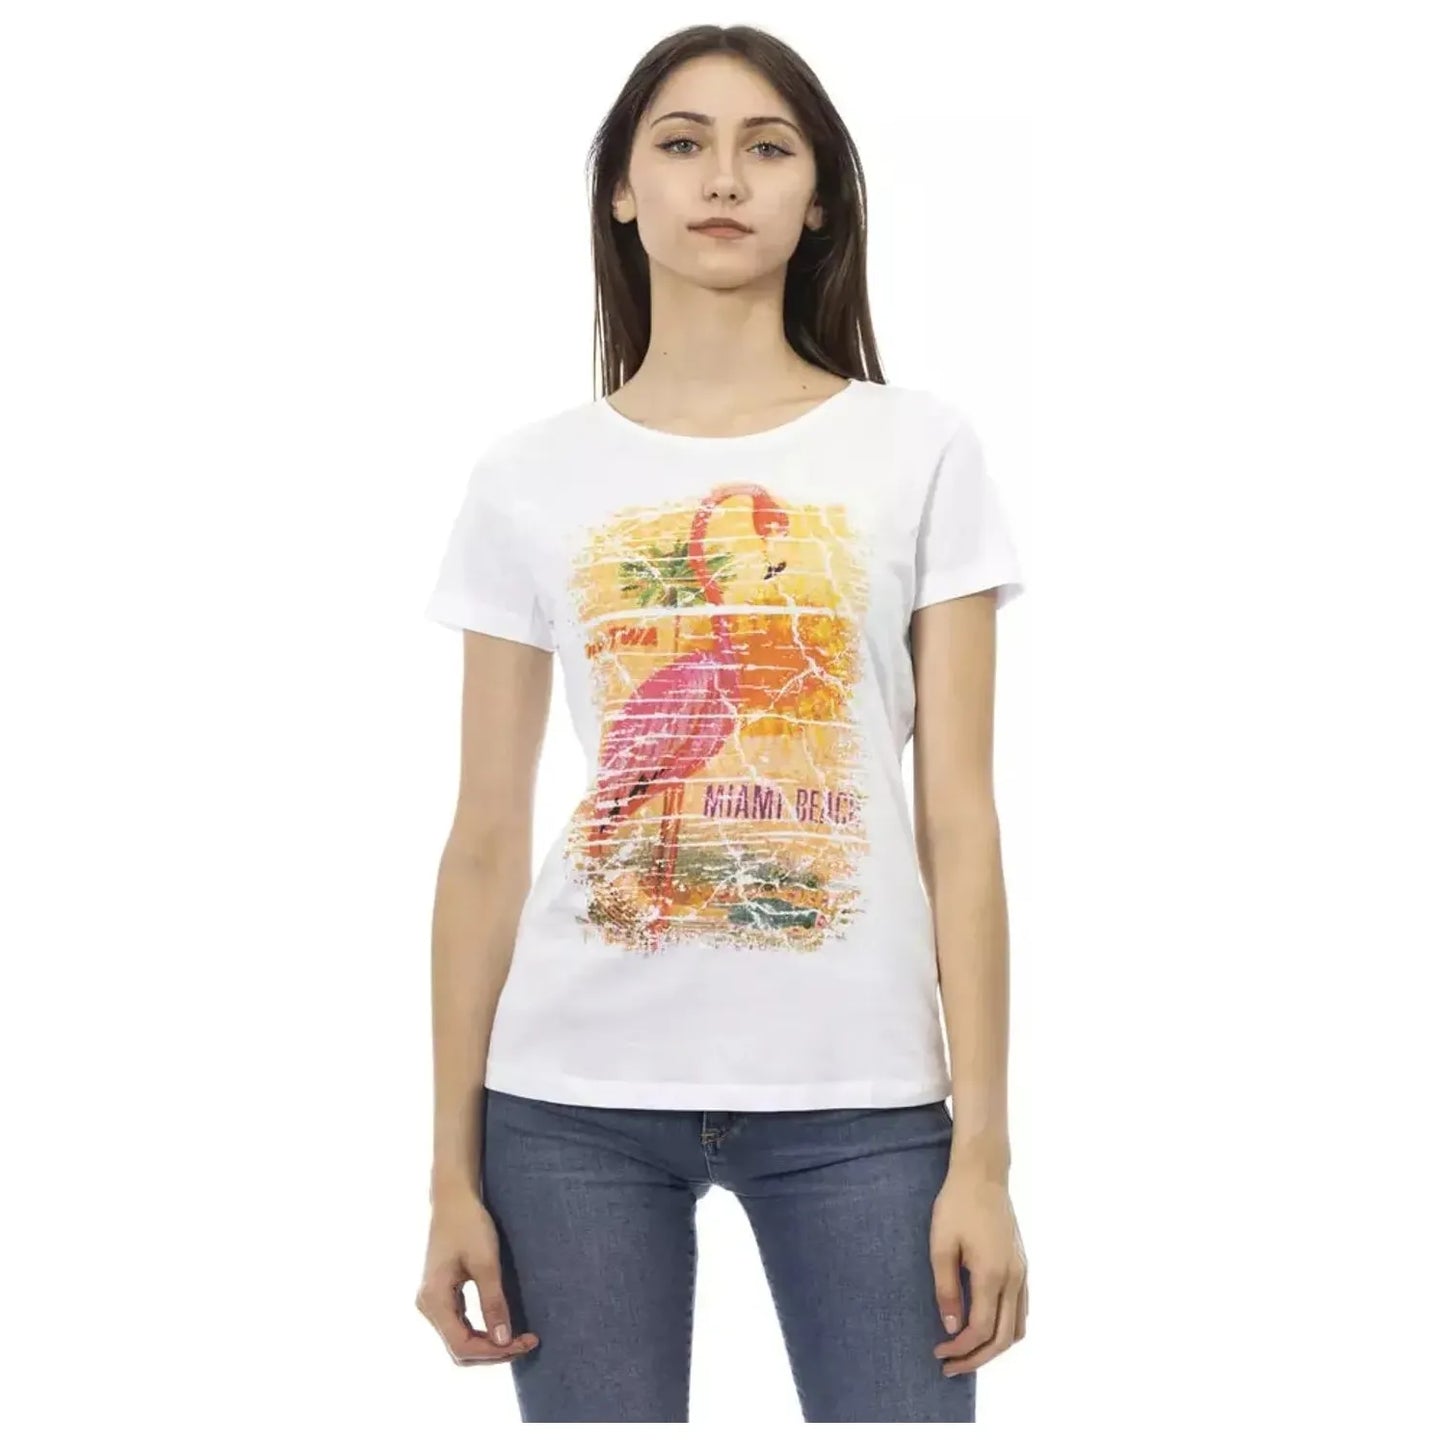 Trussardi Action Chic White Tee with Graphic Flair white-cotton-tops-t-shirt-104